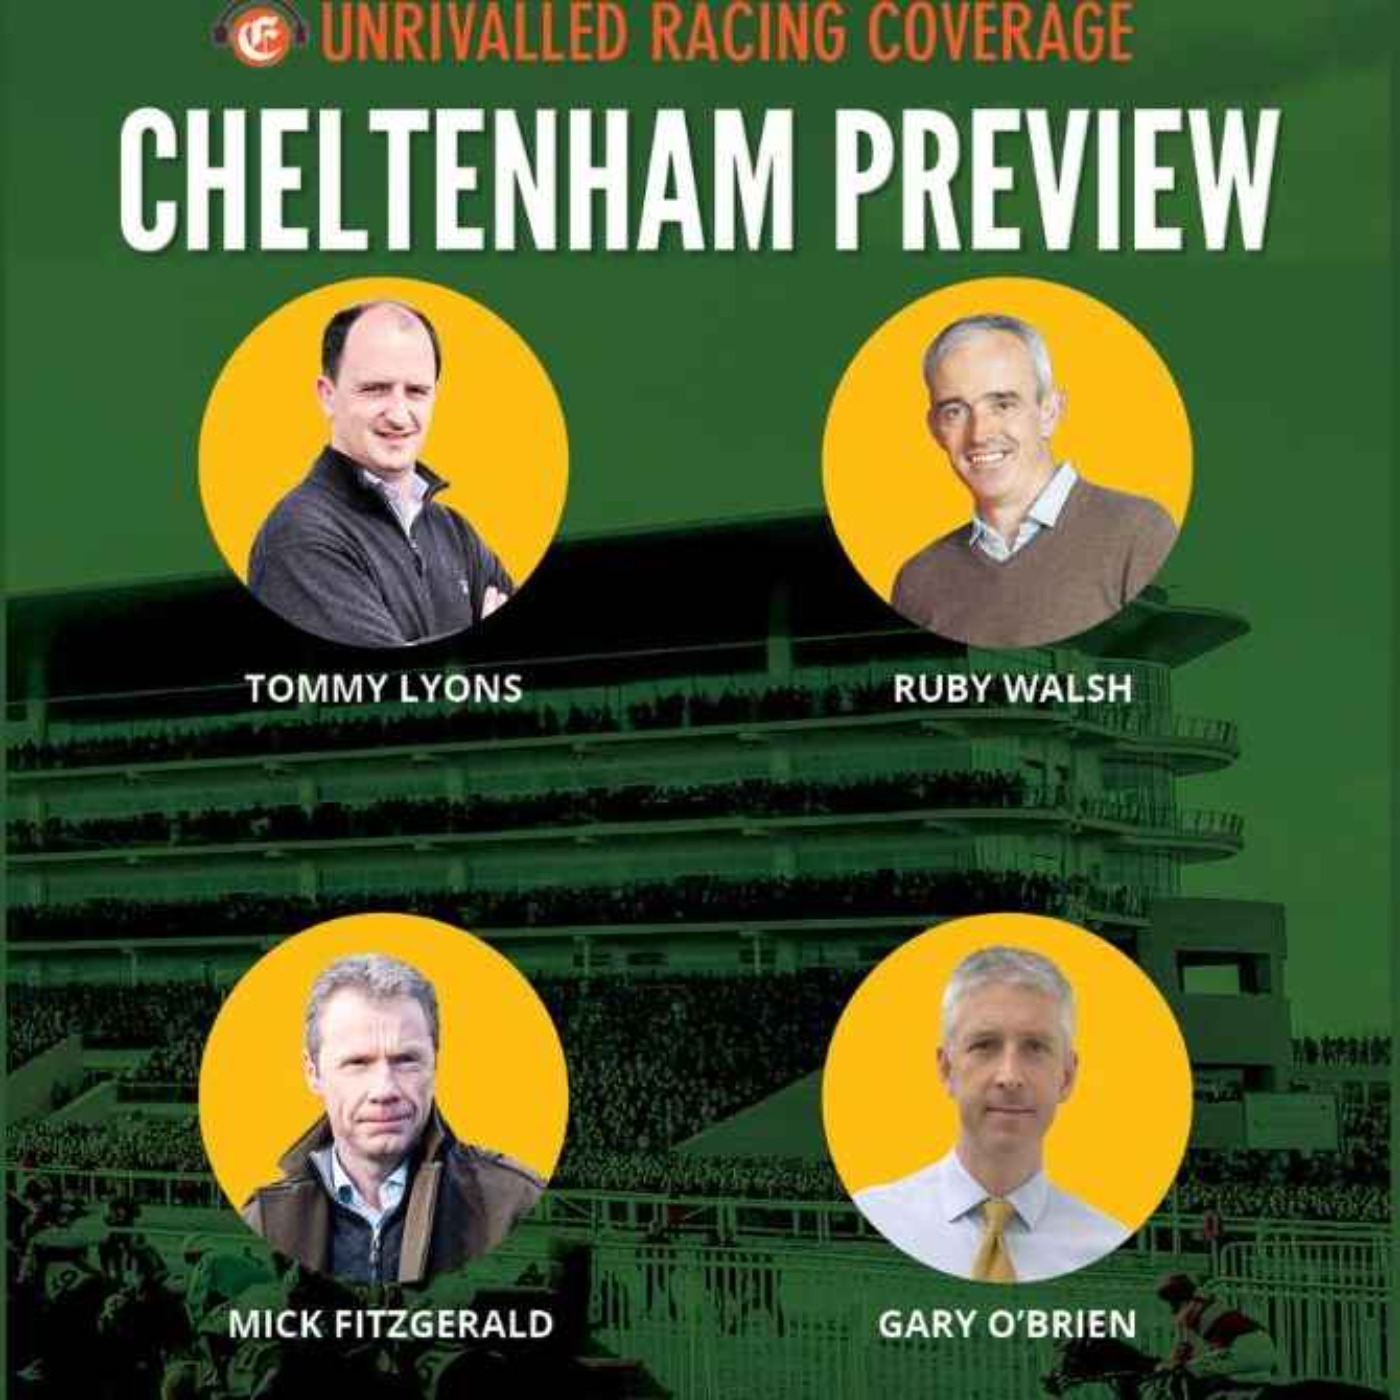 Cheltenham Preview 2023: Tommy Lyons joined by Ruby Walsh, Mick Fitzgerald and Gary O'Brien